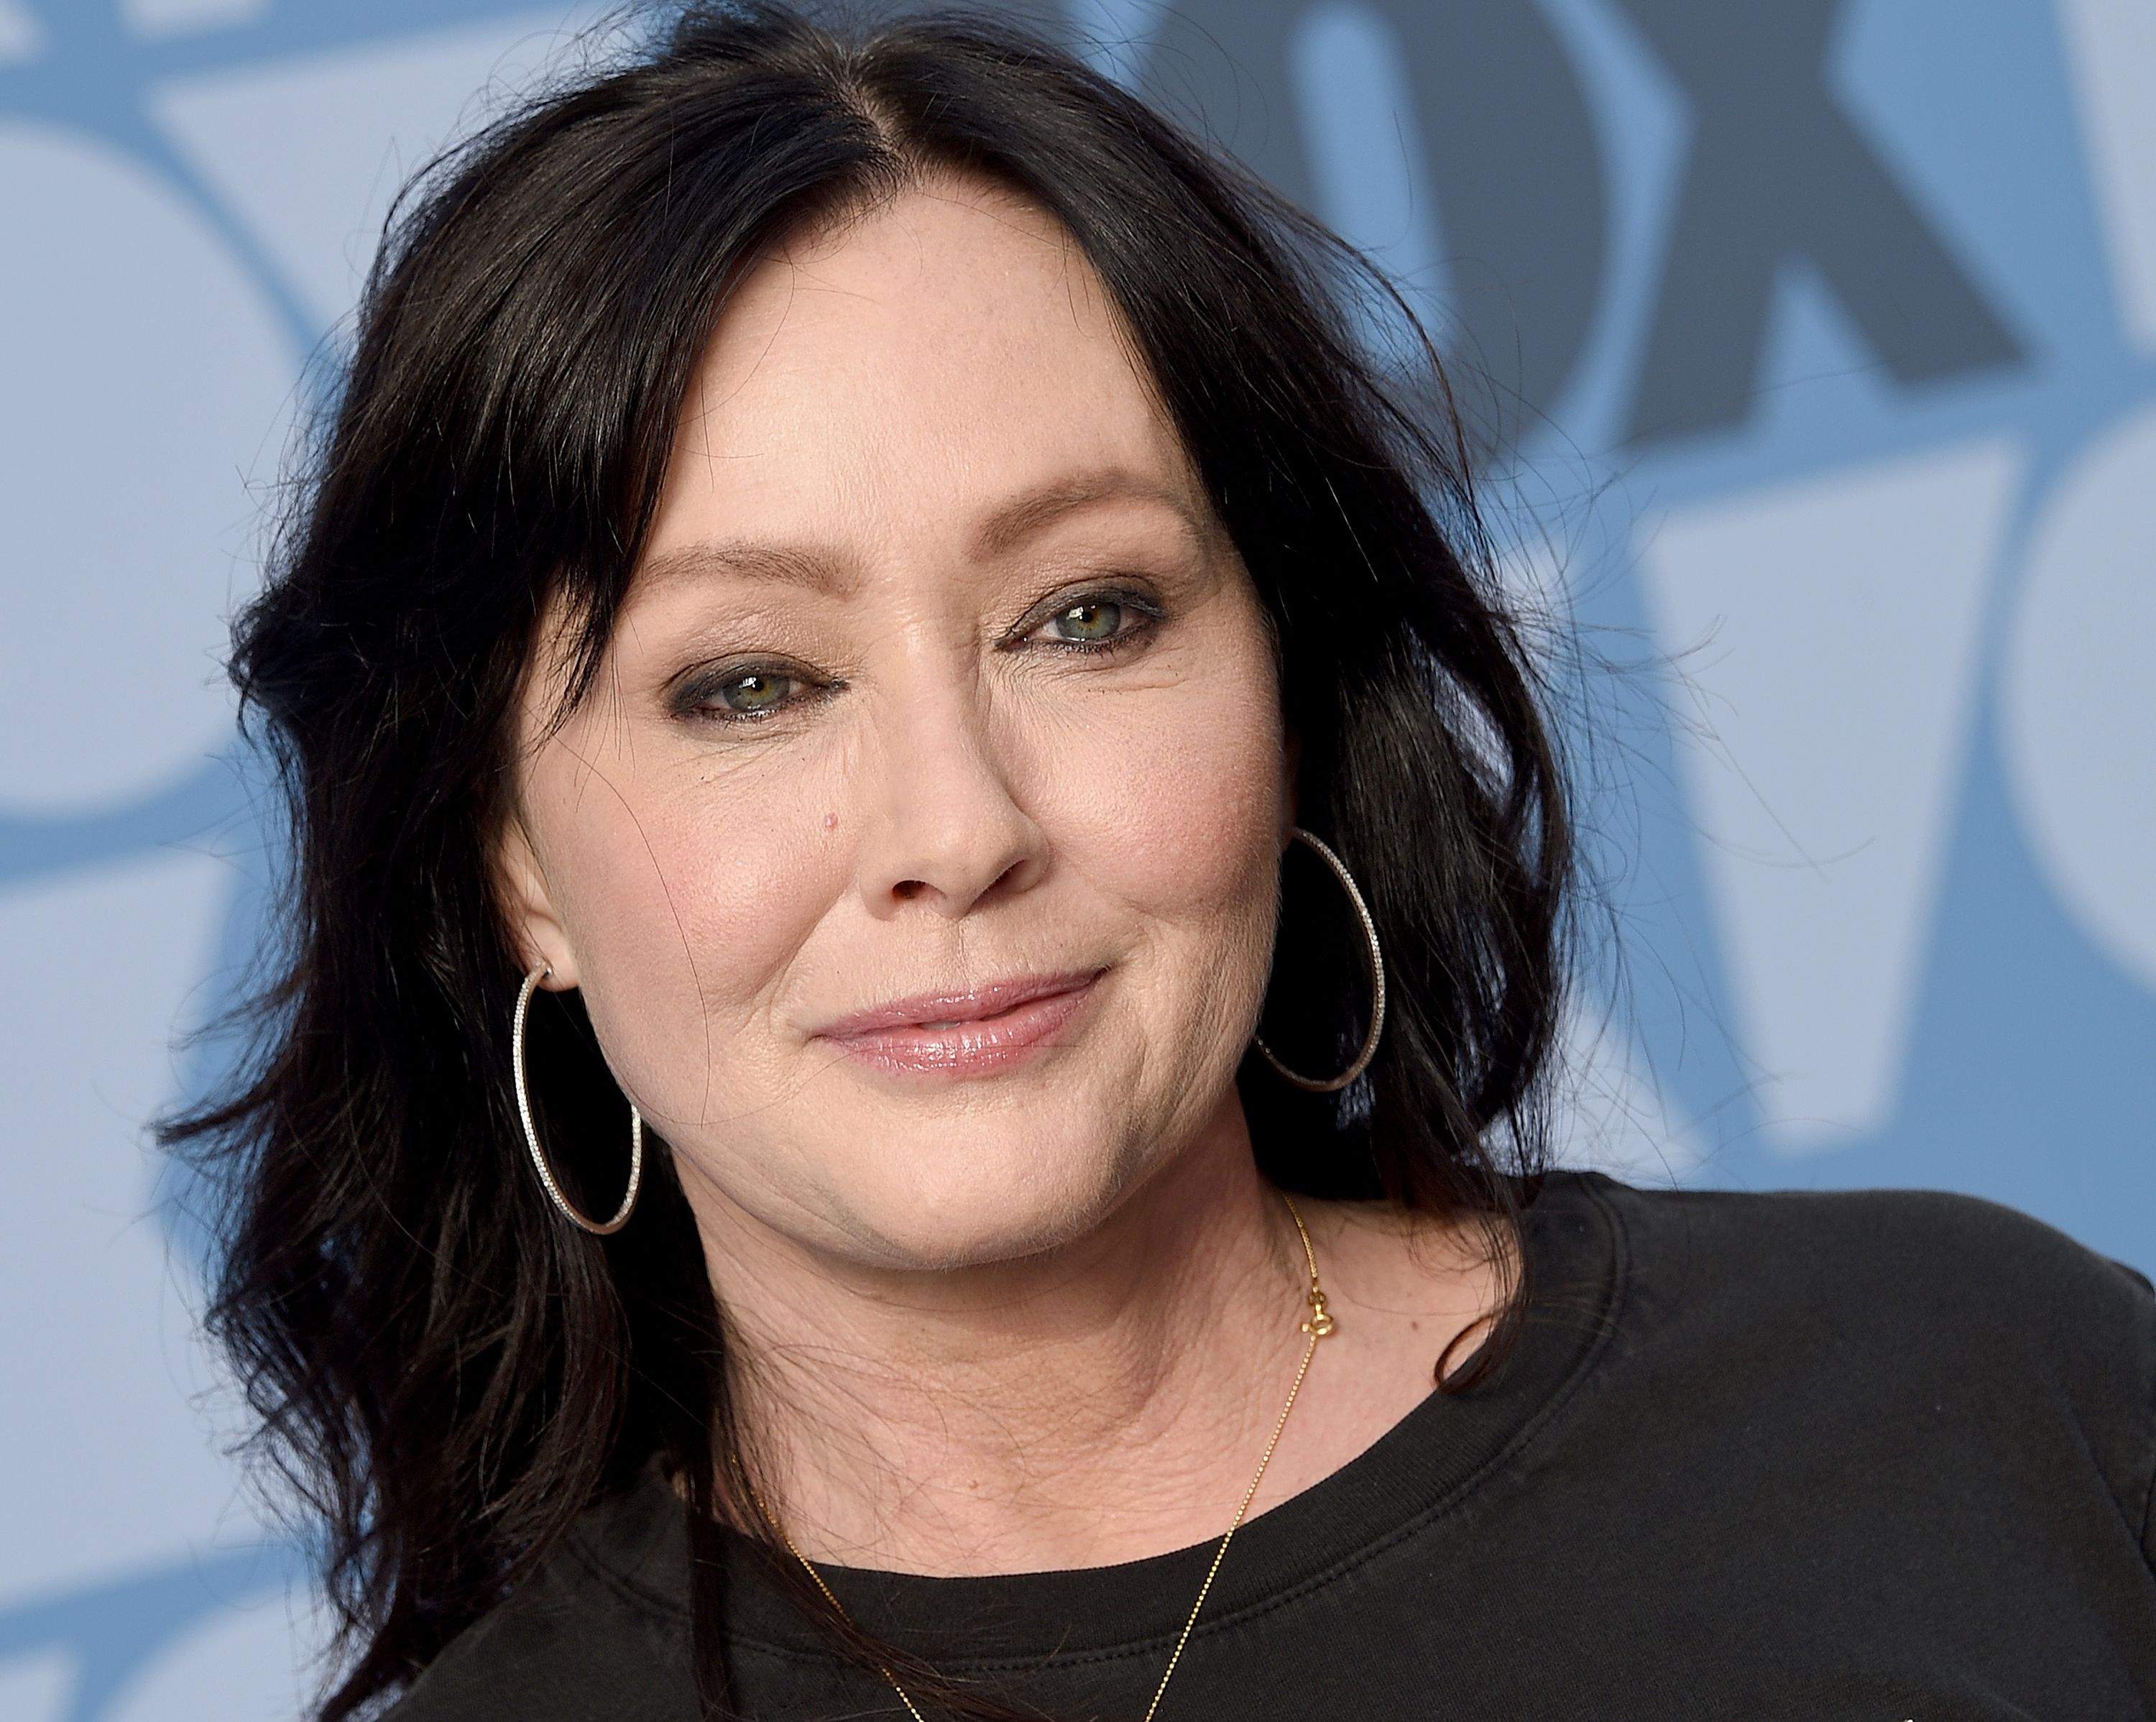 Actress Shannen Doherty reveals she